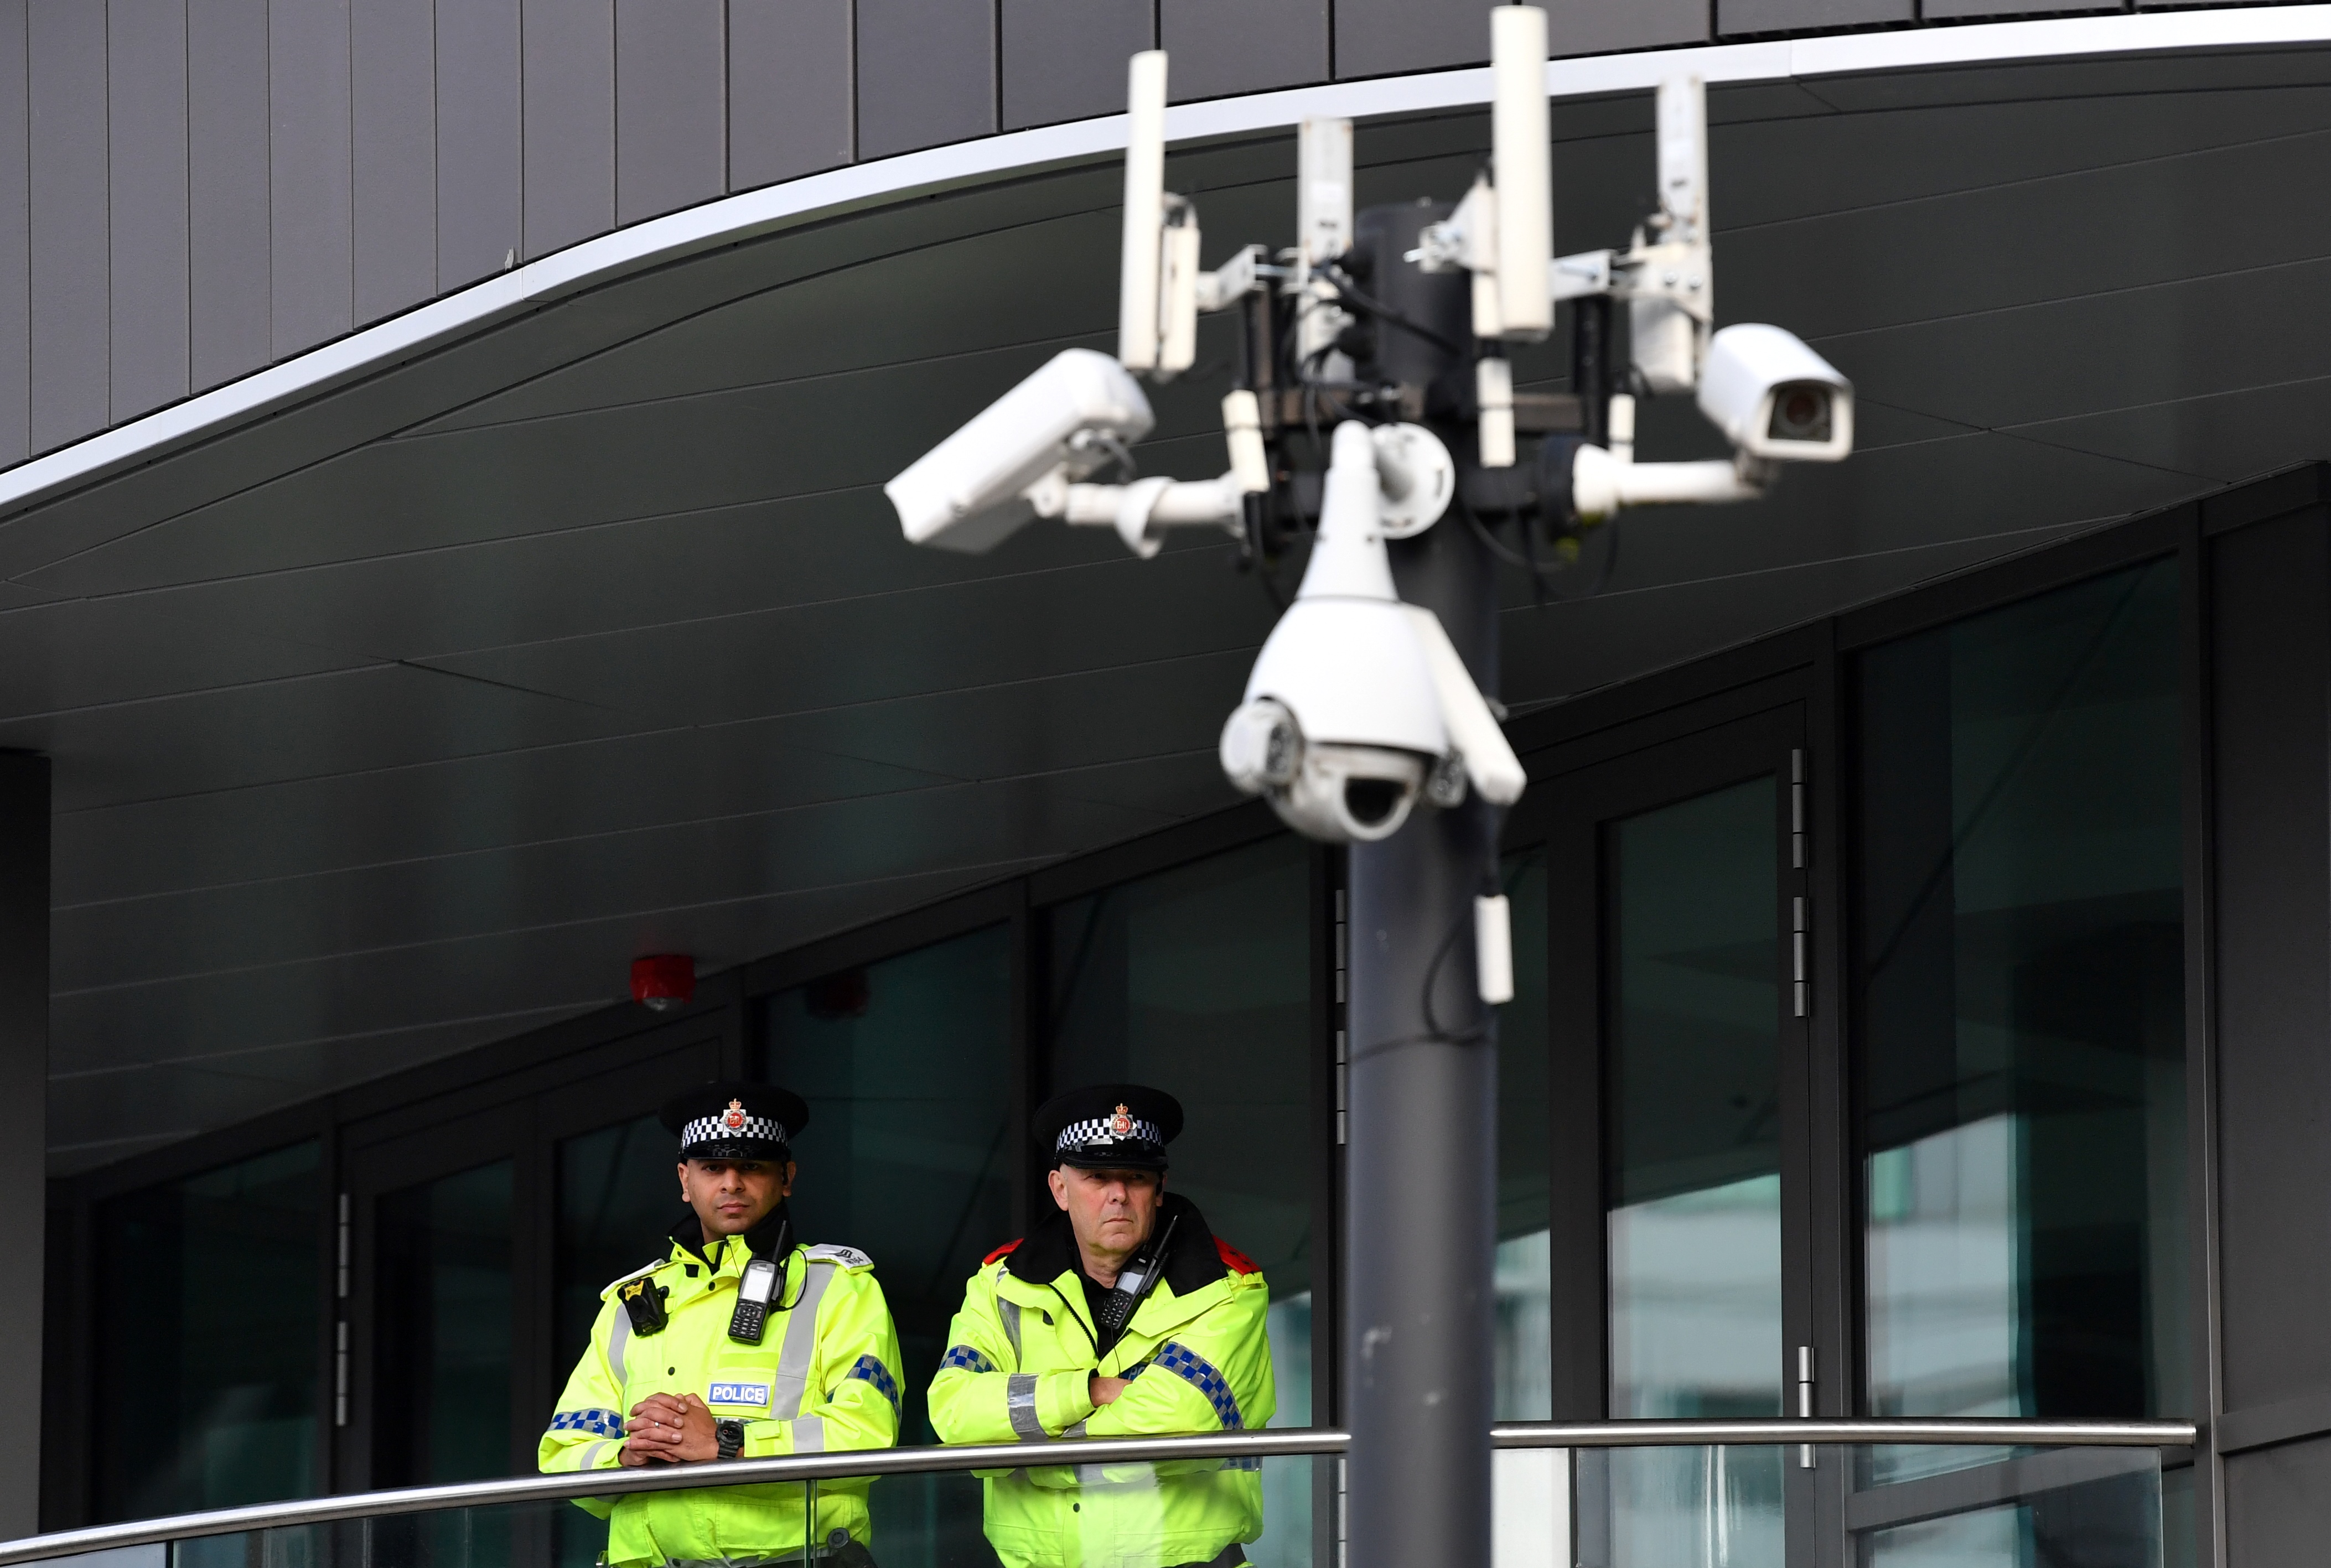 UK Bans Chinese Surveillance Cameras Over Security Concerns